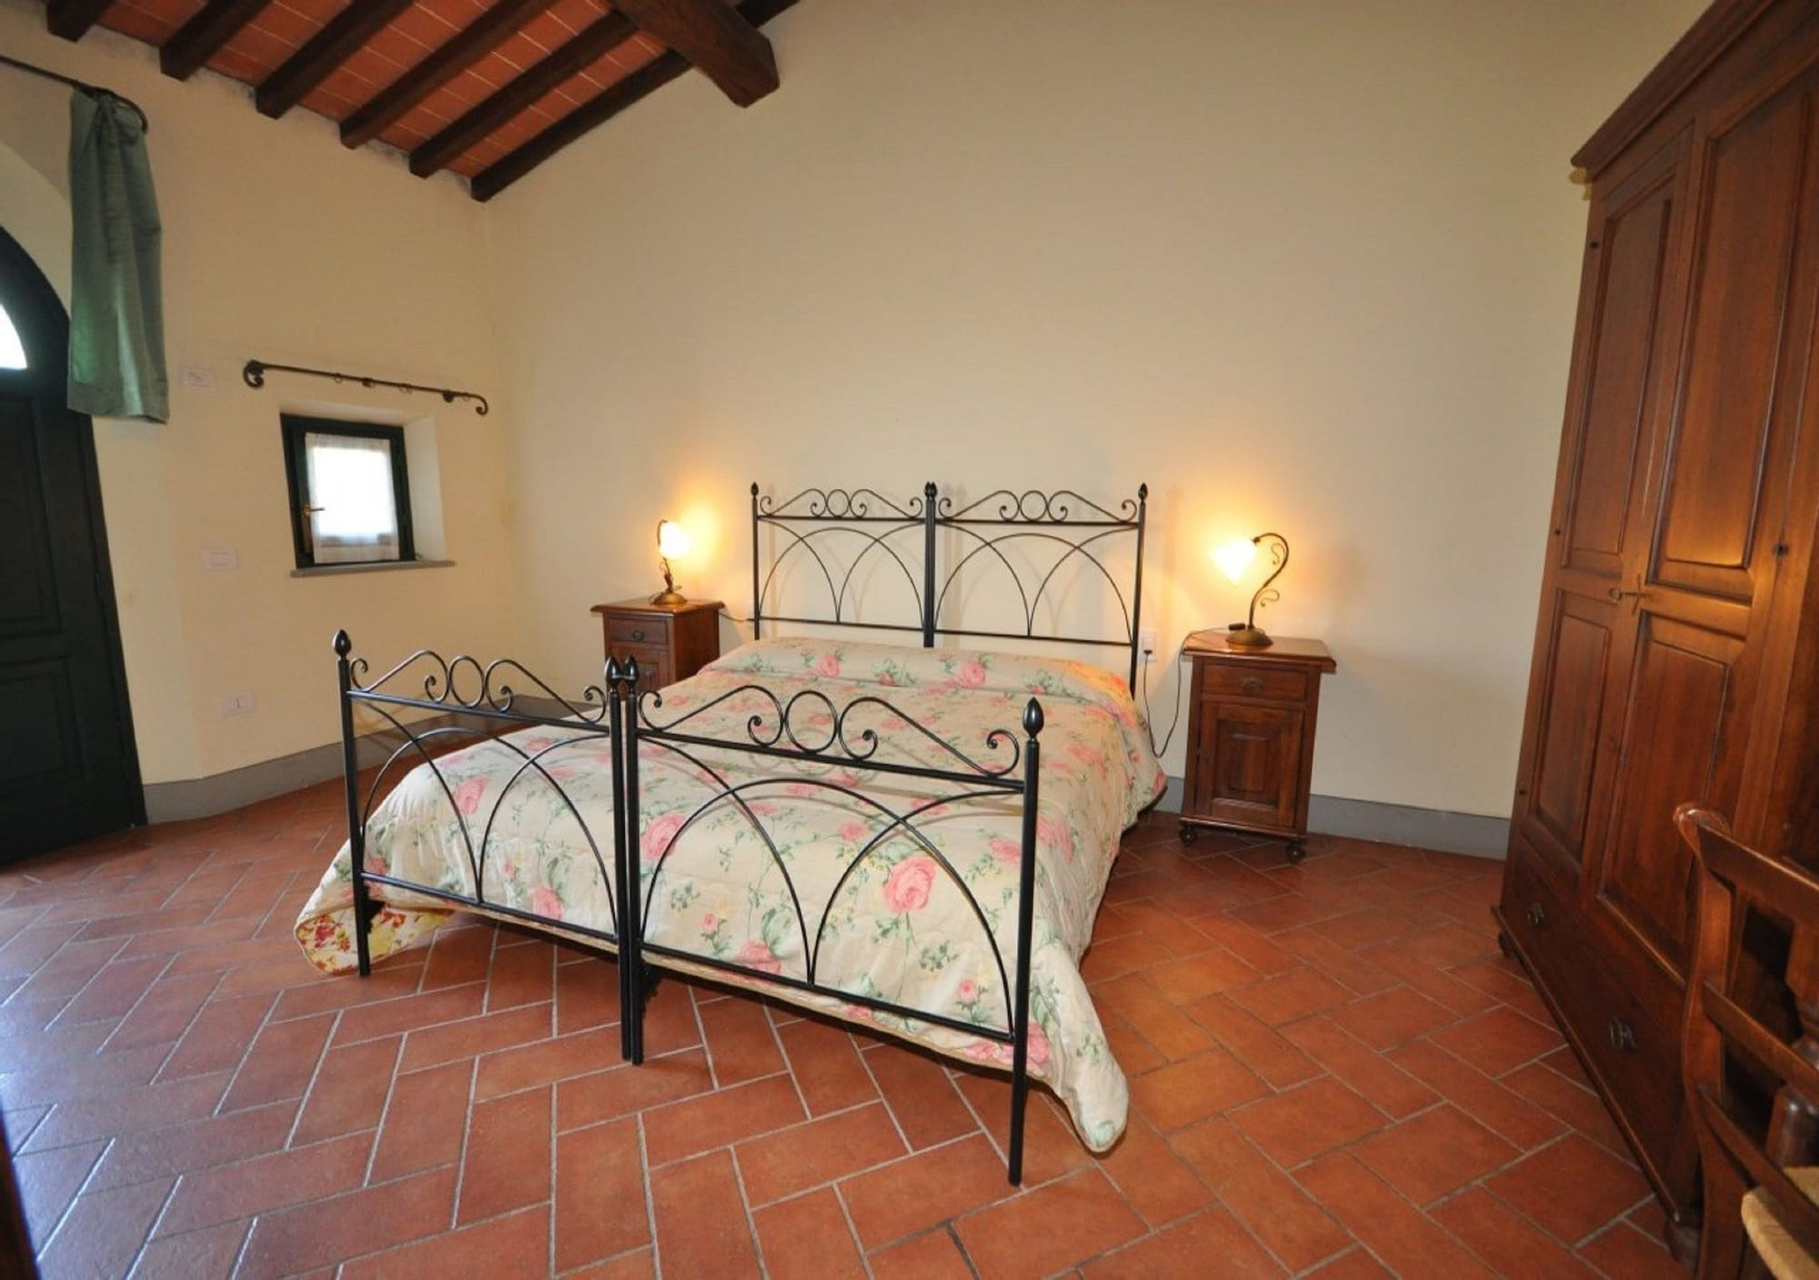 Bedroom 4, Agriturismo Musignano, Florence